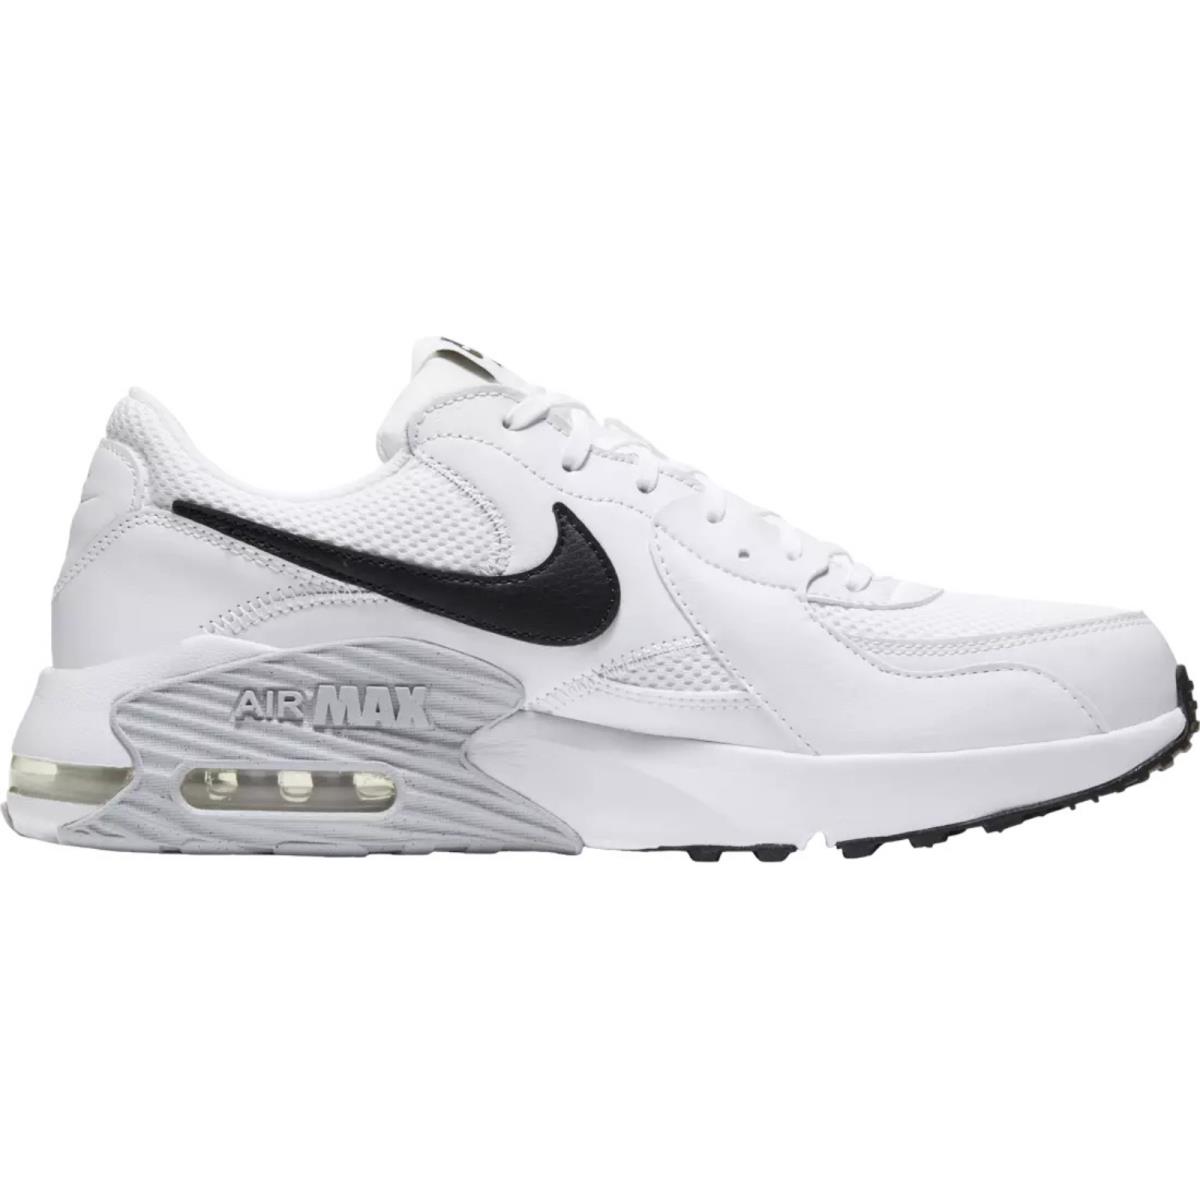 Nike Air Max Excee Men`s Casual Shoes All Colors US Sizes 7-14 White/Pure Platinum/Black